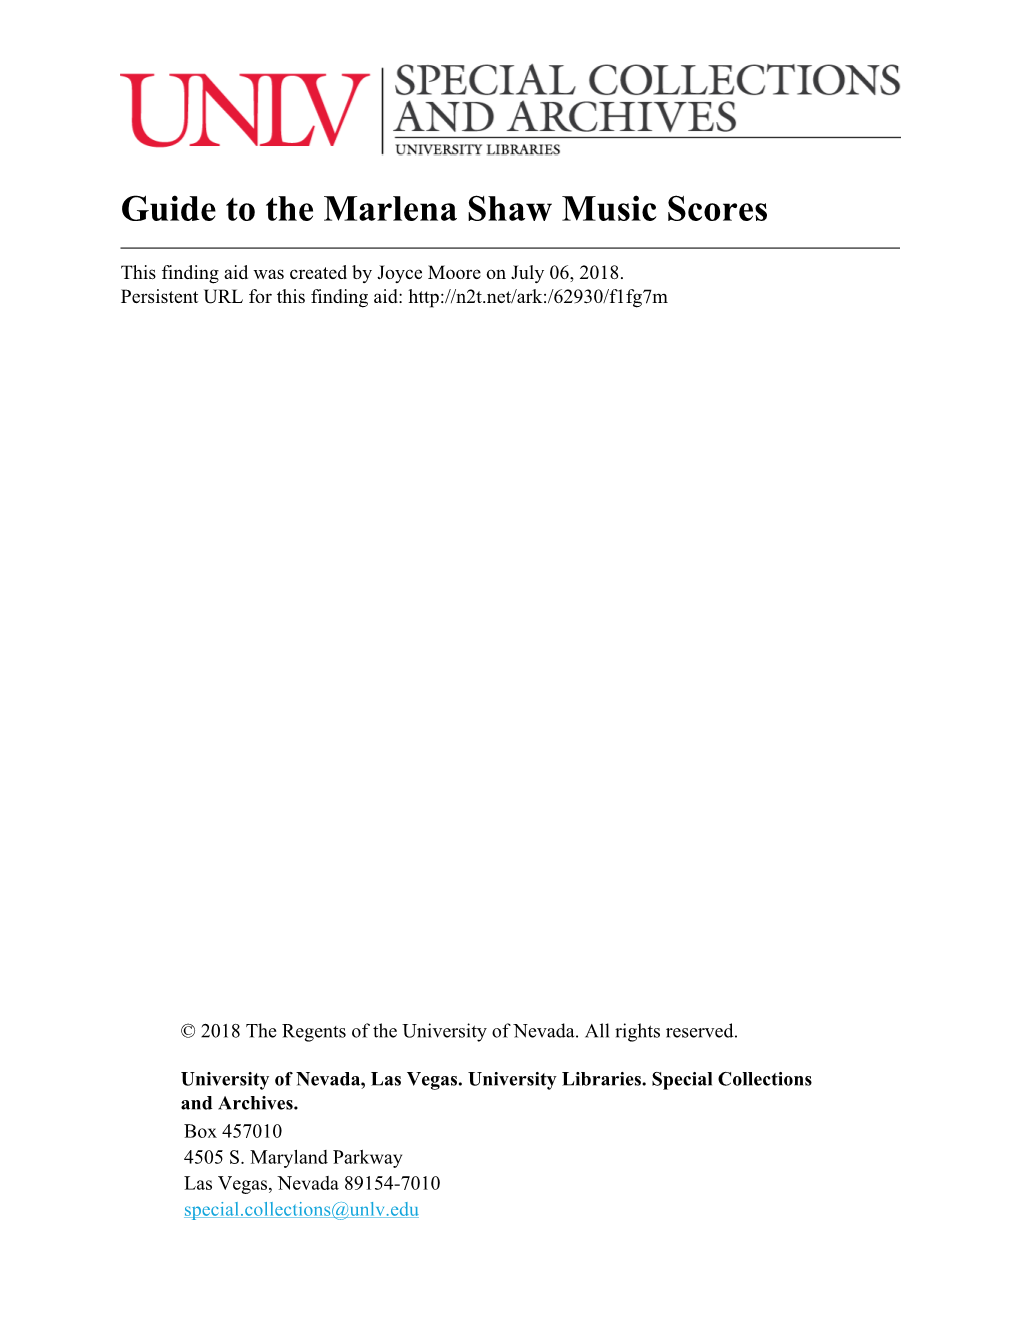 Guide to the Marlena Shaw Music Scores